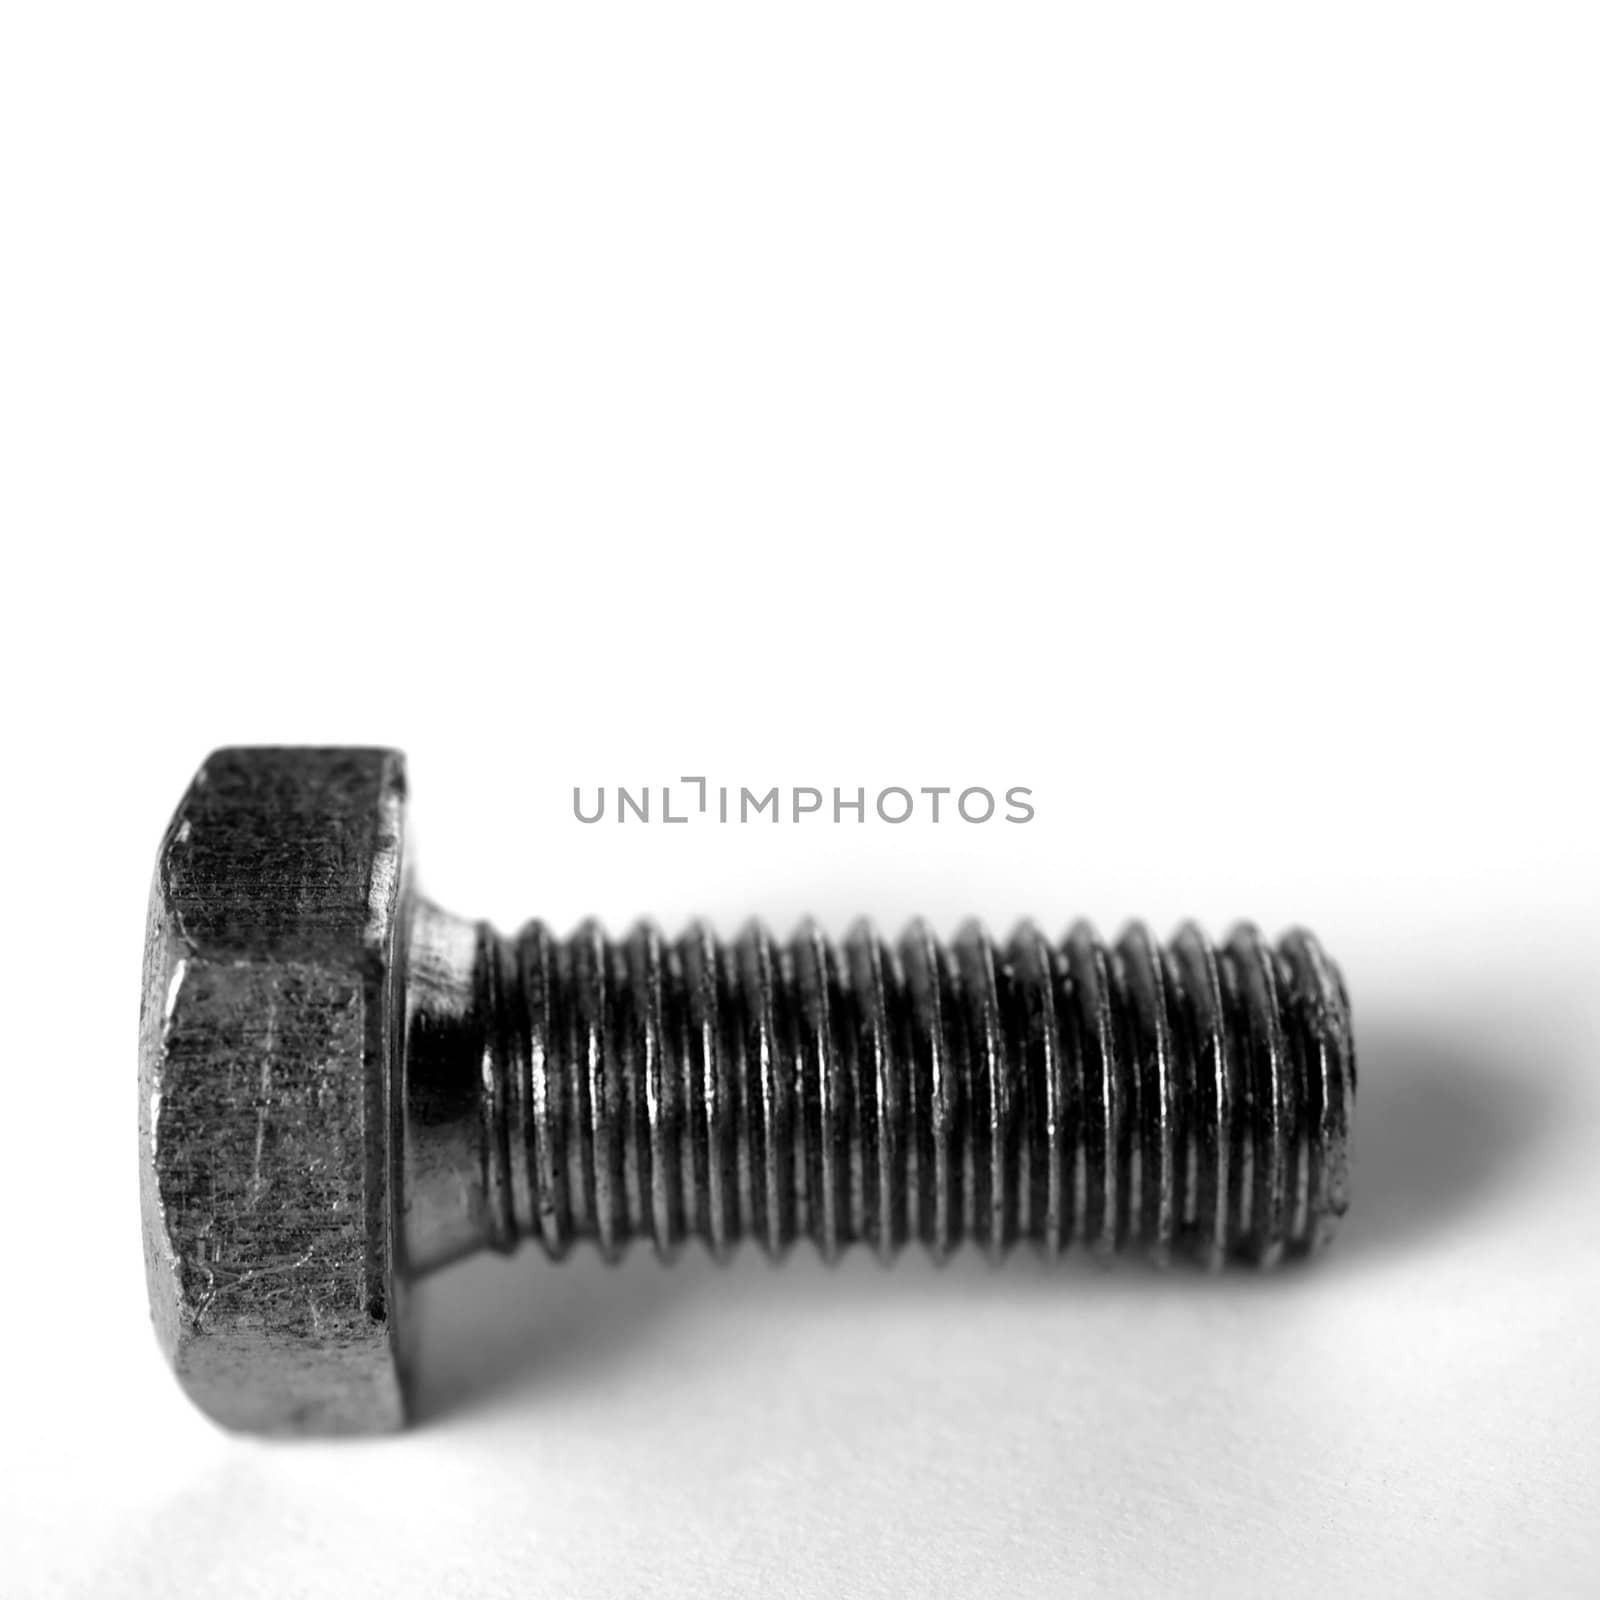 Bolt industrial steel hardware isolated with copyspace